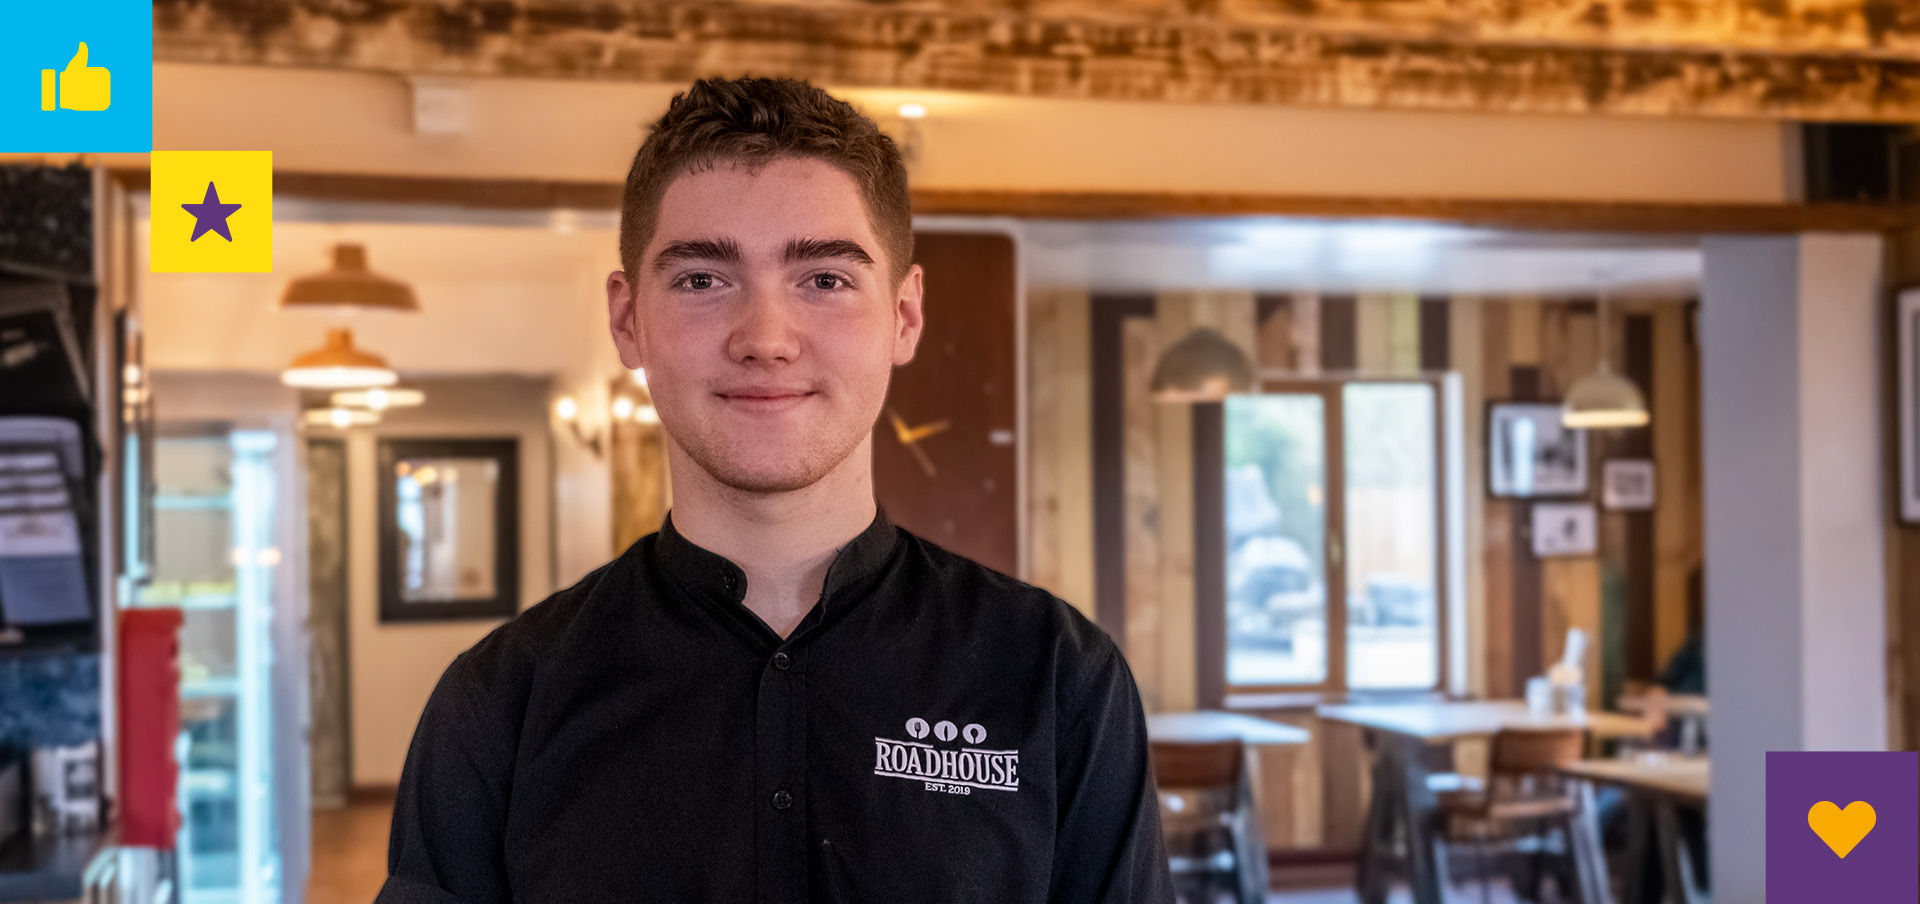 Hospitality trainee, Kieran, standing in the restaurant dining area